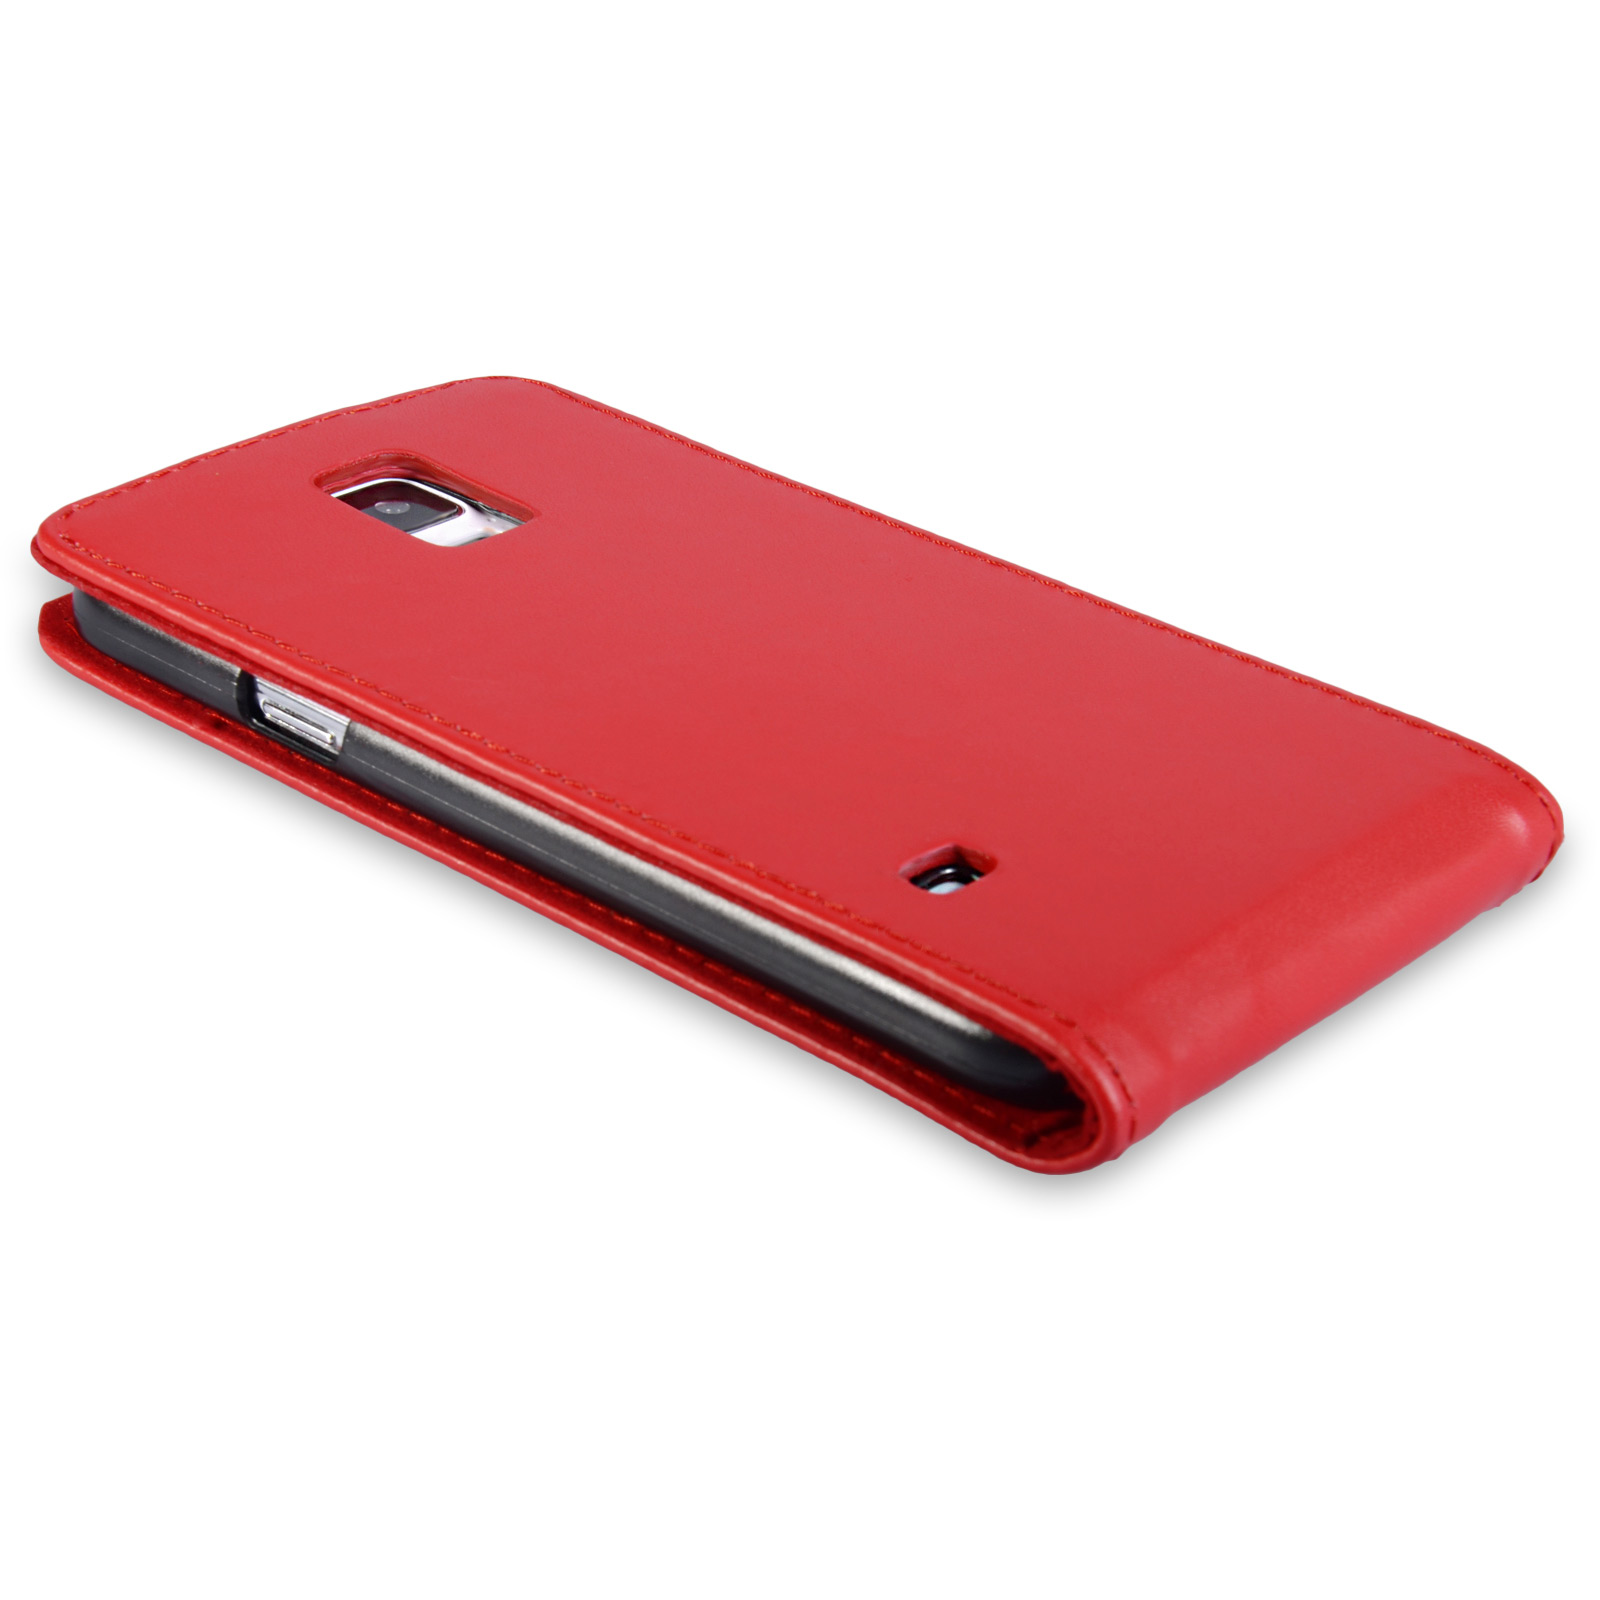 YouSave Accessories Samsung Galaxy S5 Leather-Effect Flip Case - Red